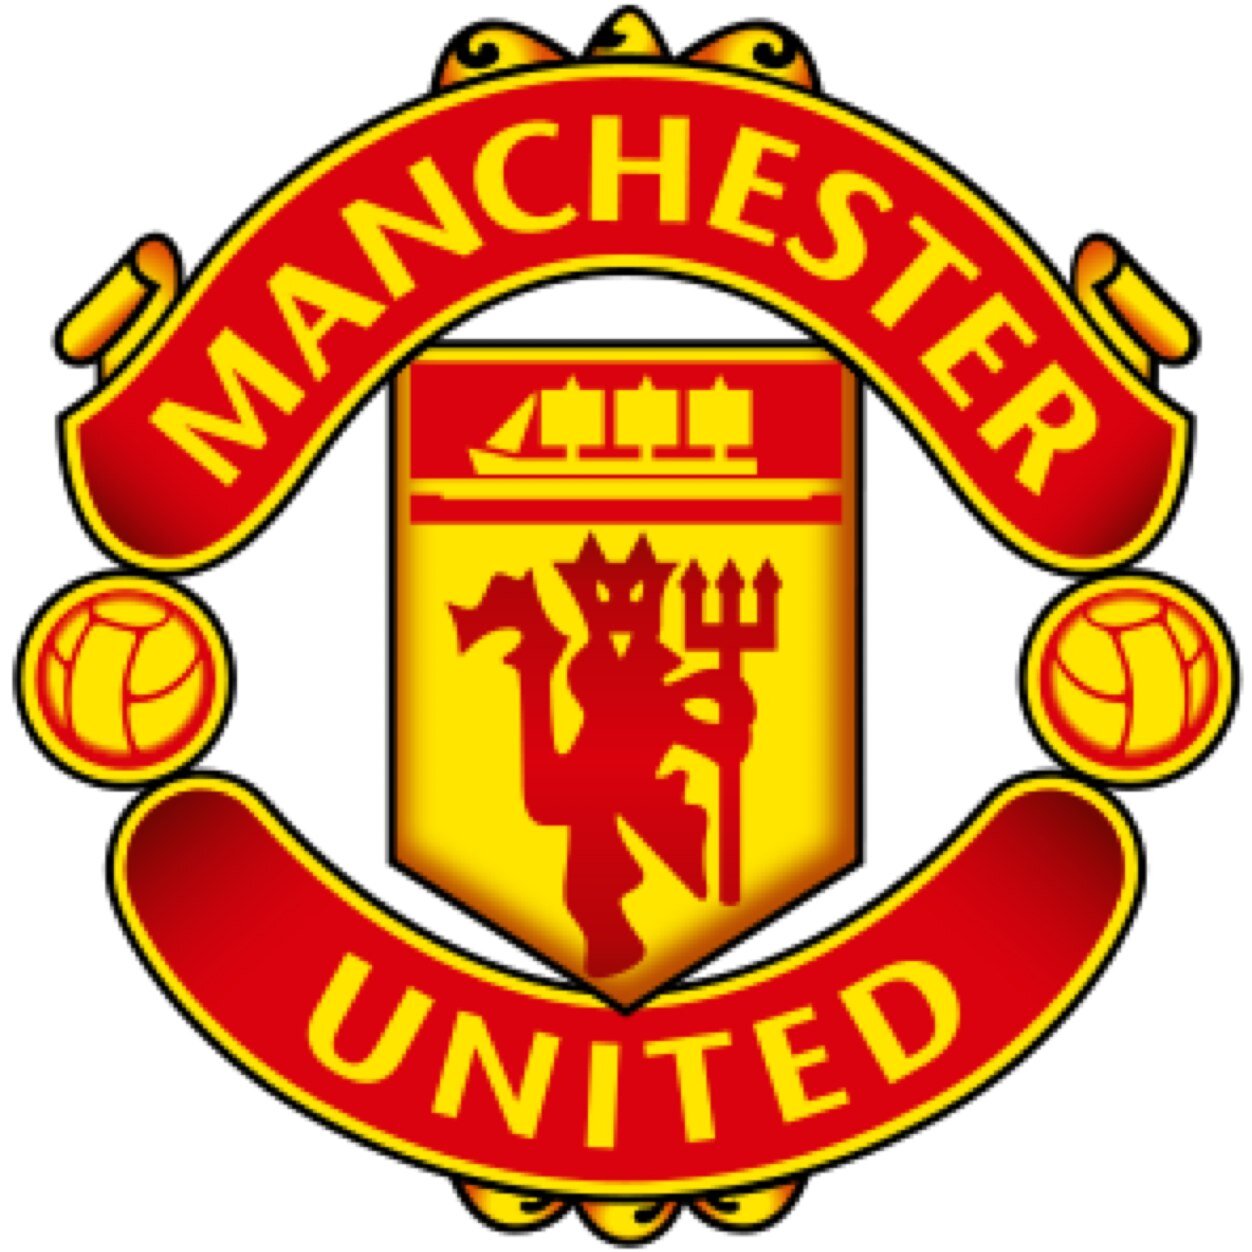 Follow for News,Reviews,Photos and Scores from Manchester United. 

The Biggest Club In The World

#MUFC.